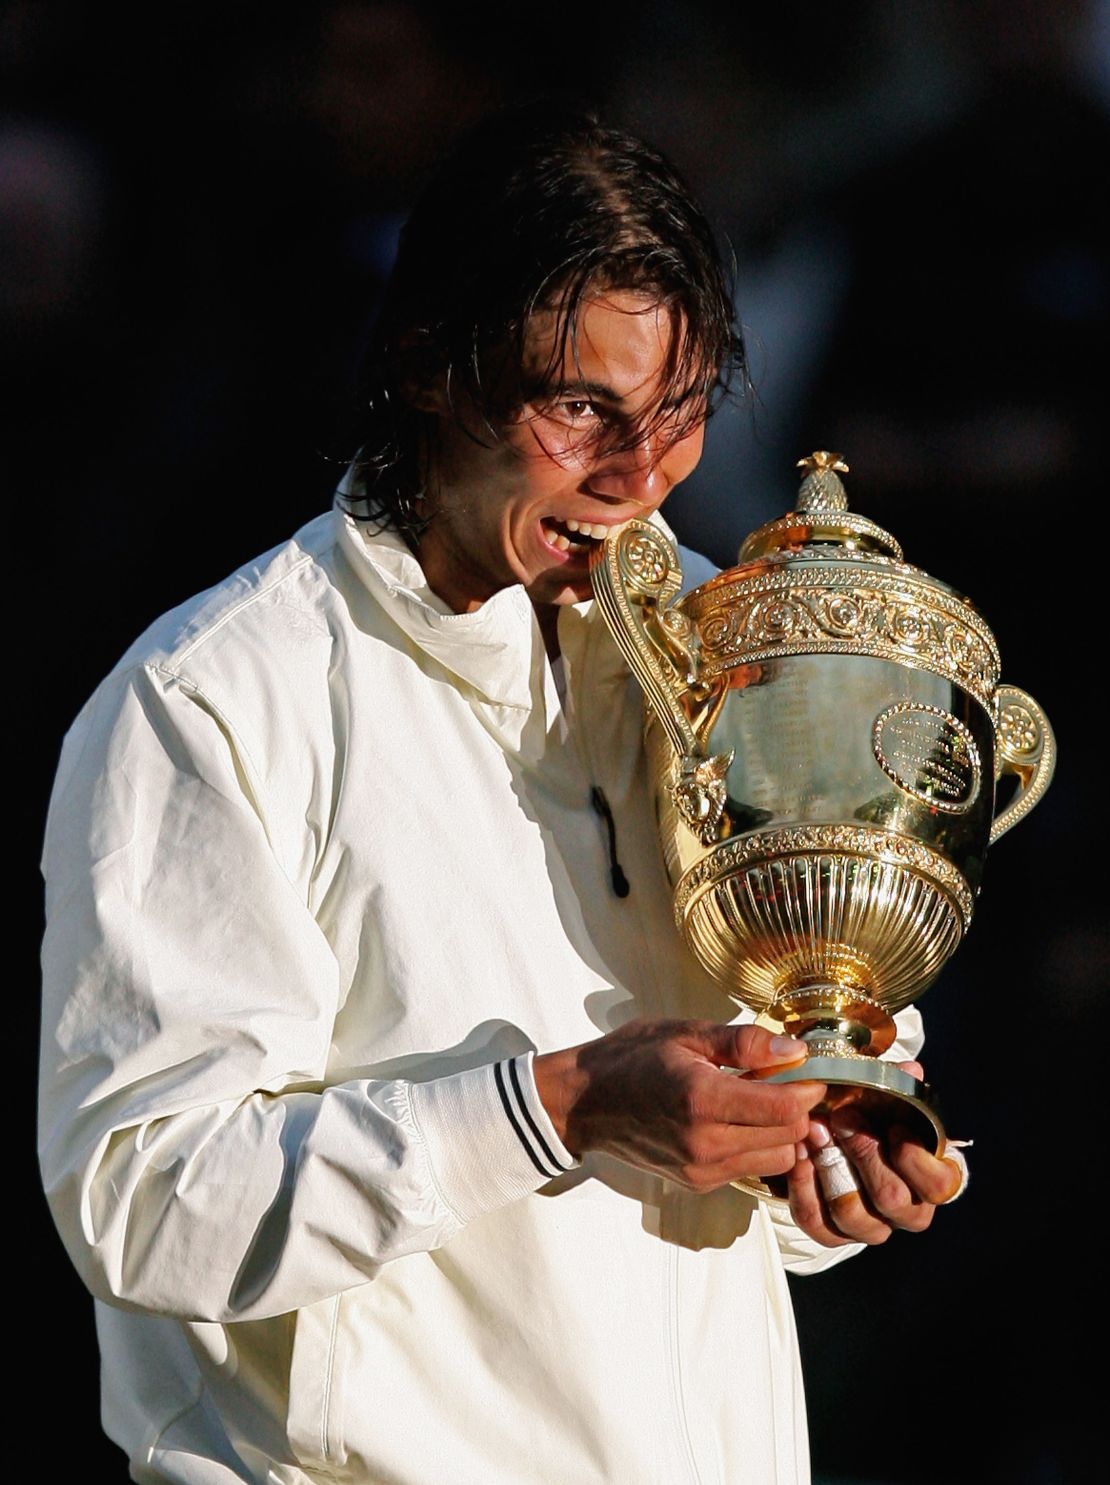 Third time lucky: Nadal celebrates winning Wimbledon in 2008, having lost to Federer in the two previous years. 